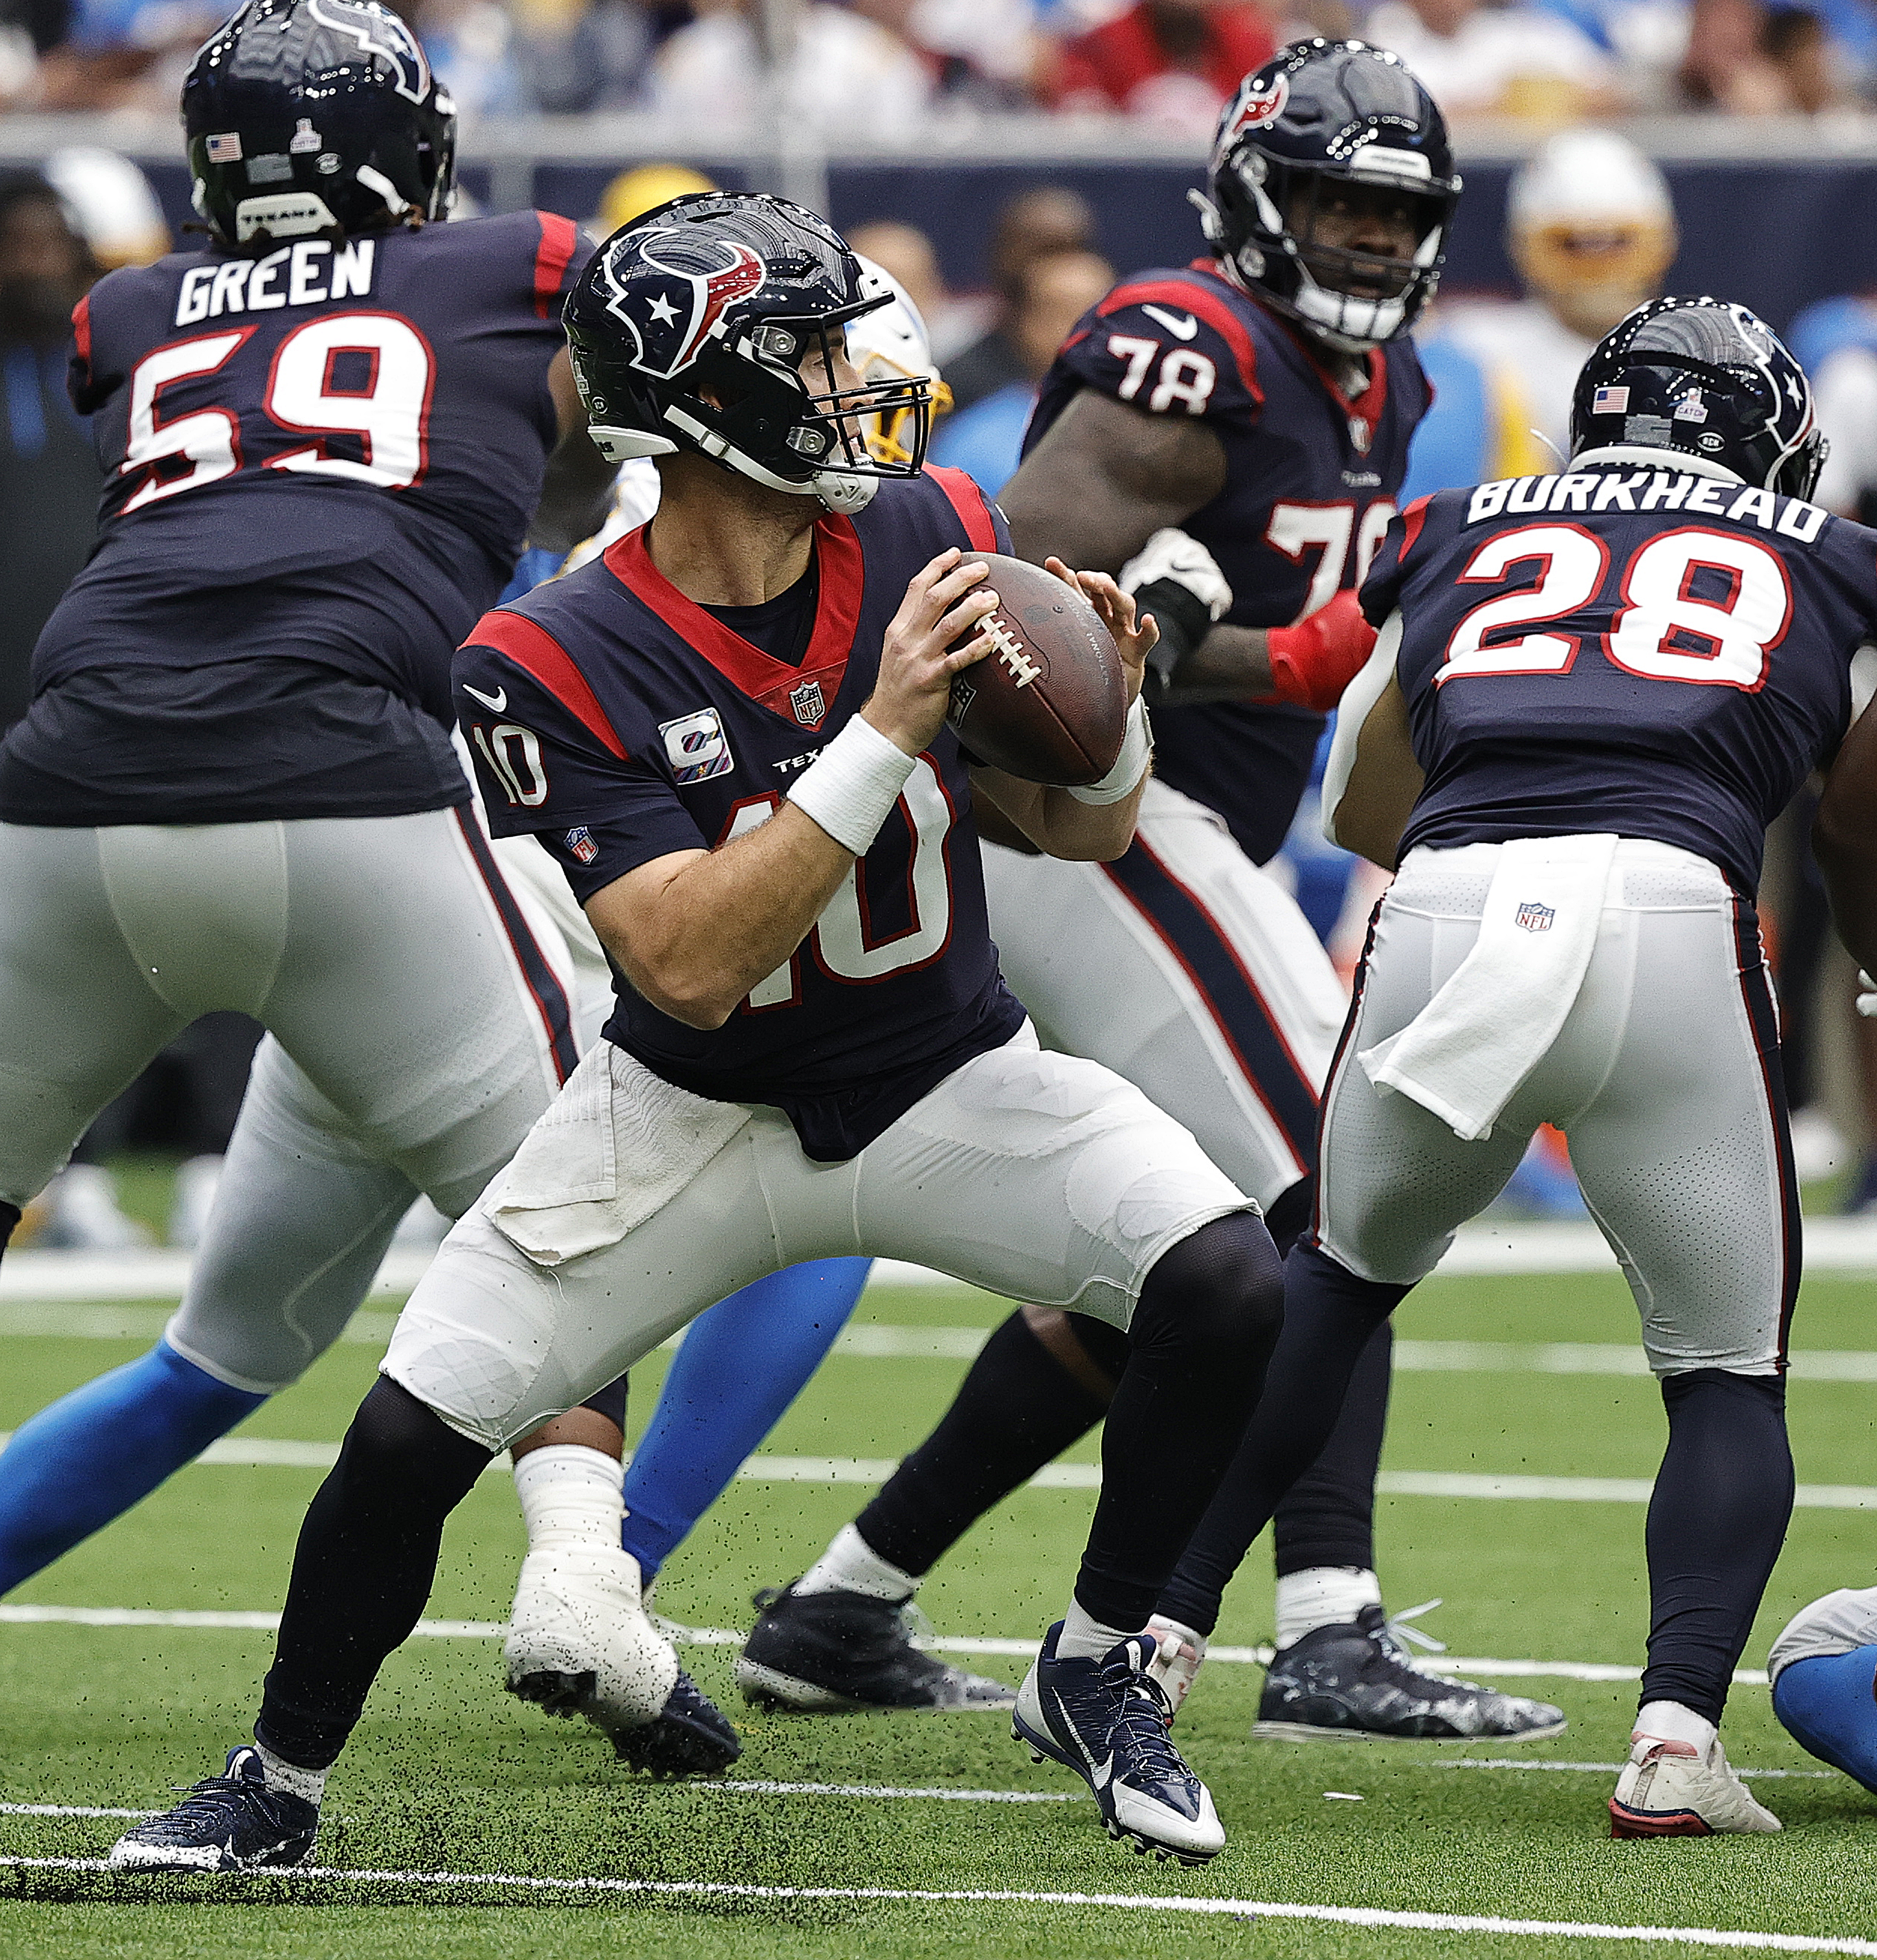 Can the Texans turn it around against the Jaguars?